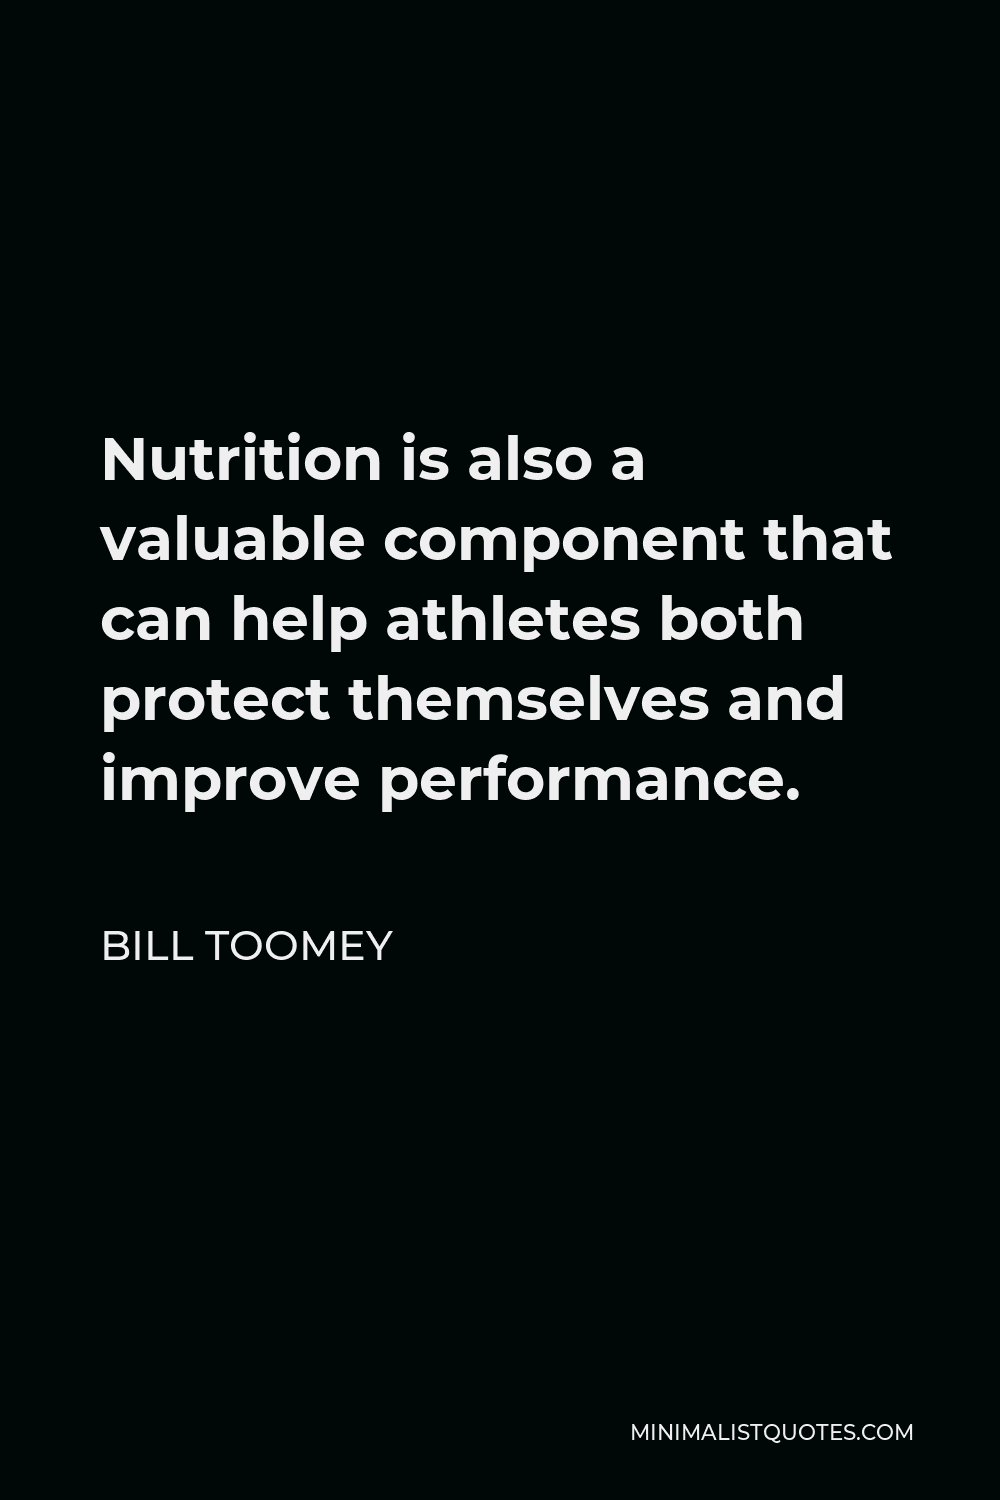 Bill Toomey Quote - Nutrition is also a valuable component that can help athletes both protect themselves and improve performance.